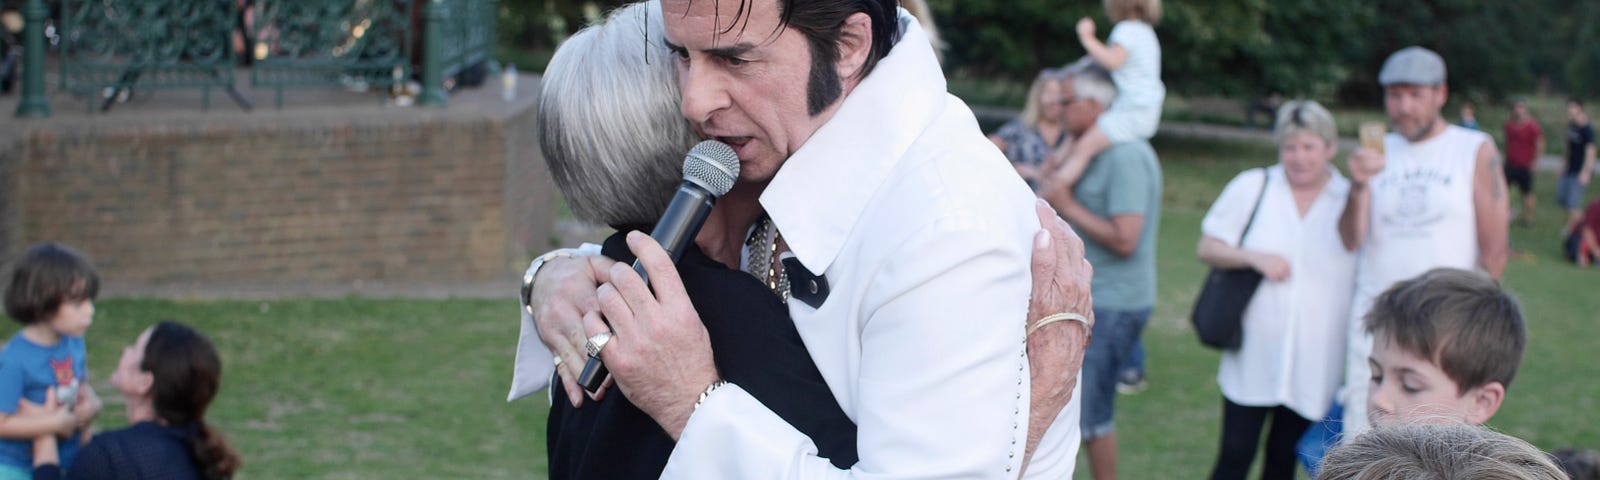 A Photo of an Elvis Impersonator Hugging a Woman by Viktoria Blomberg Book on Unsplash